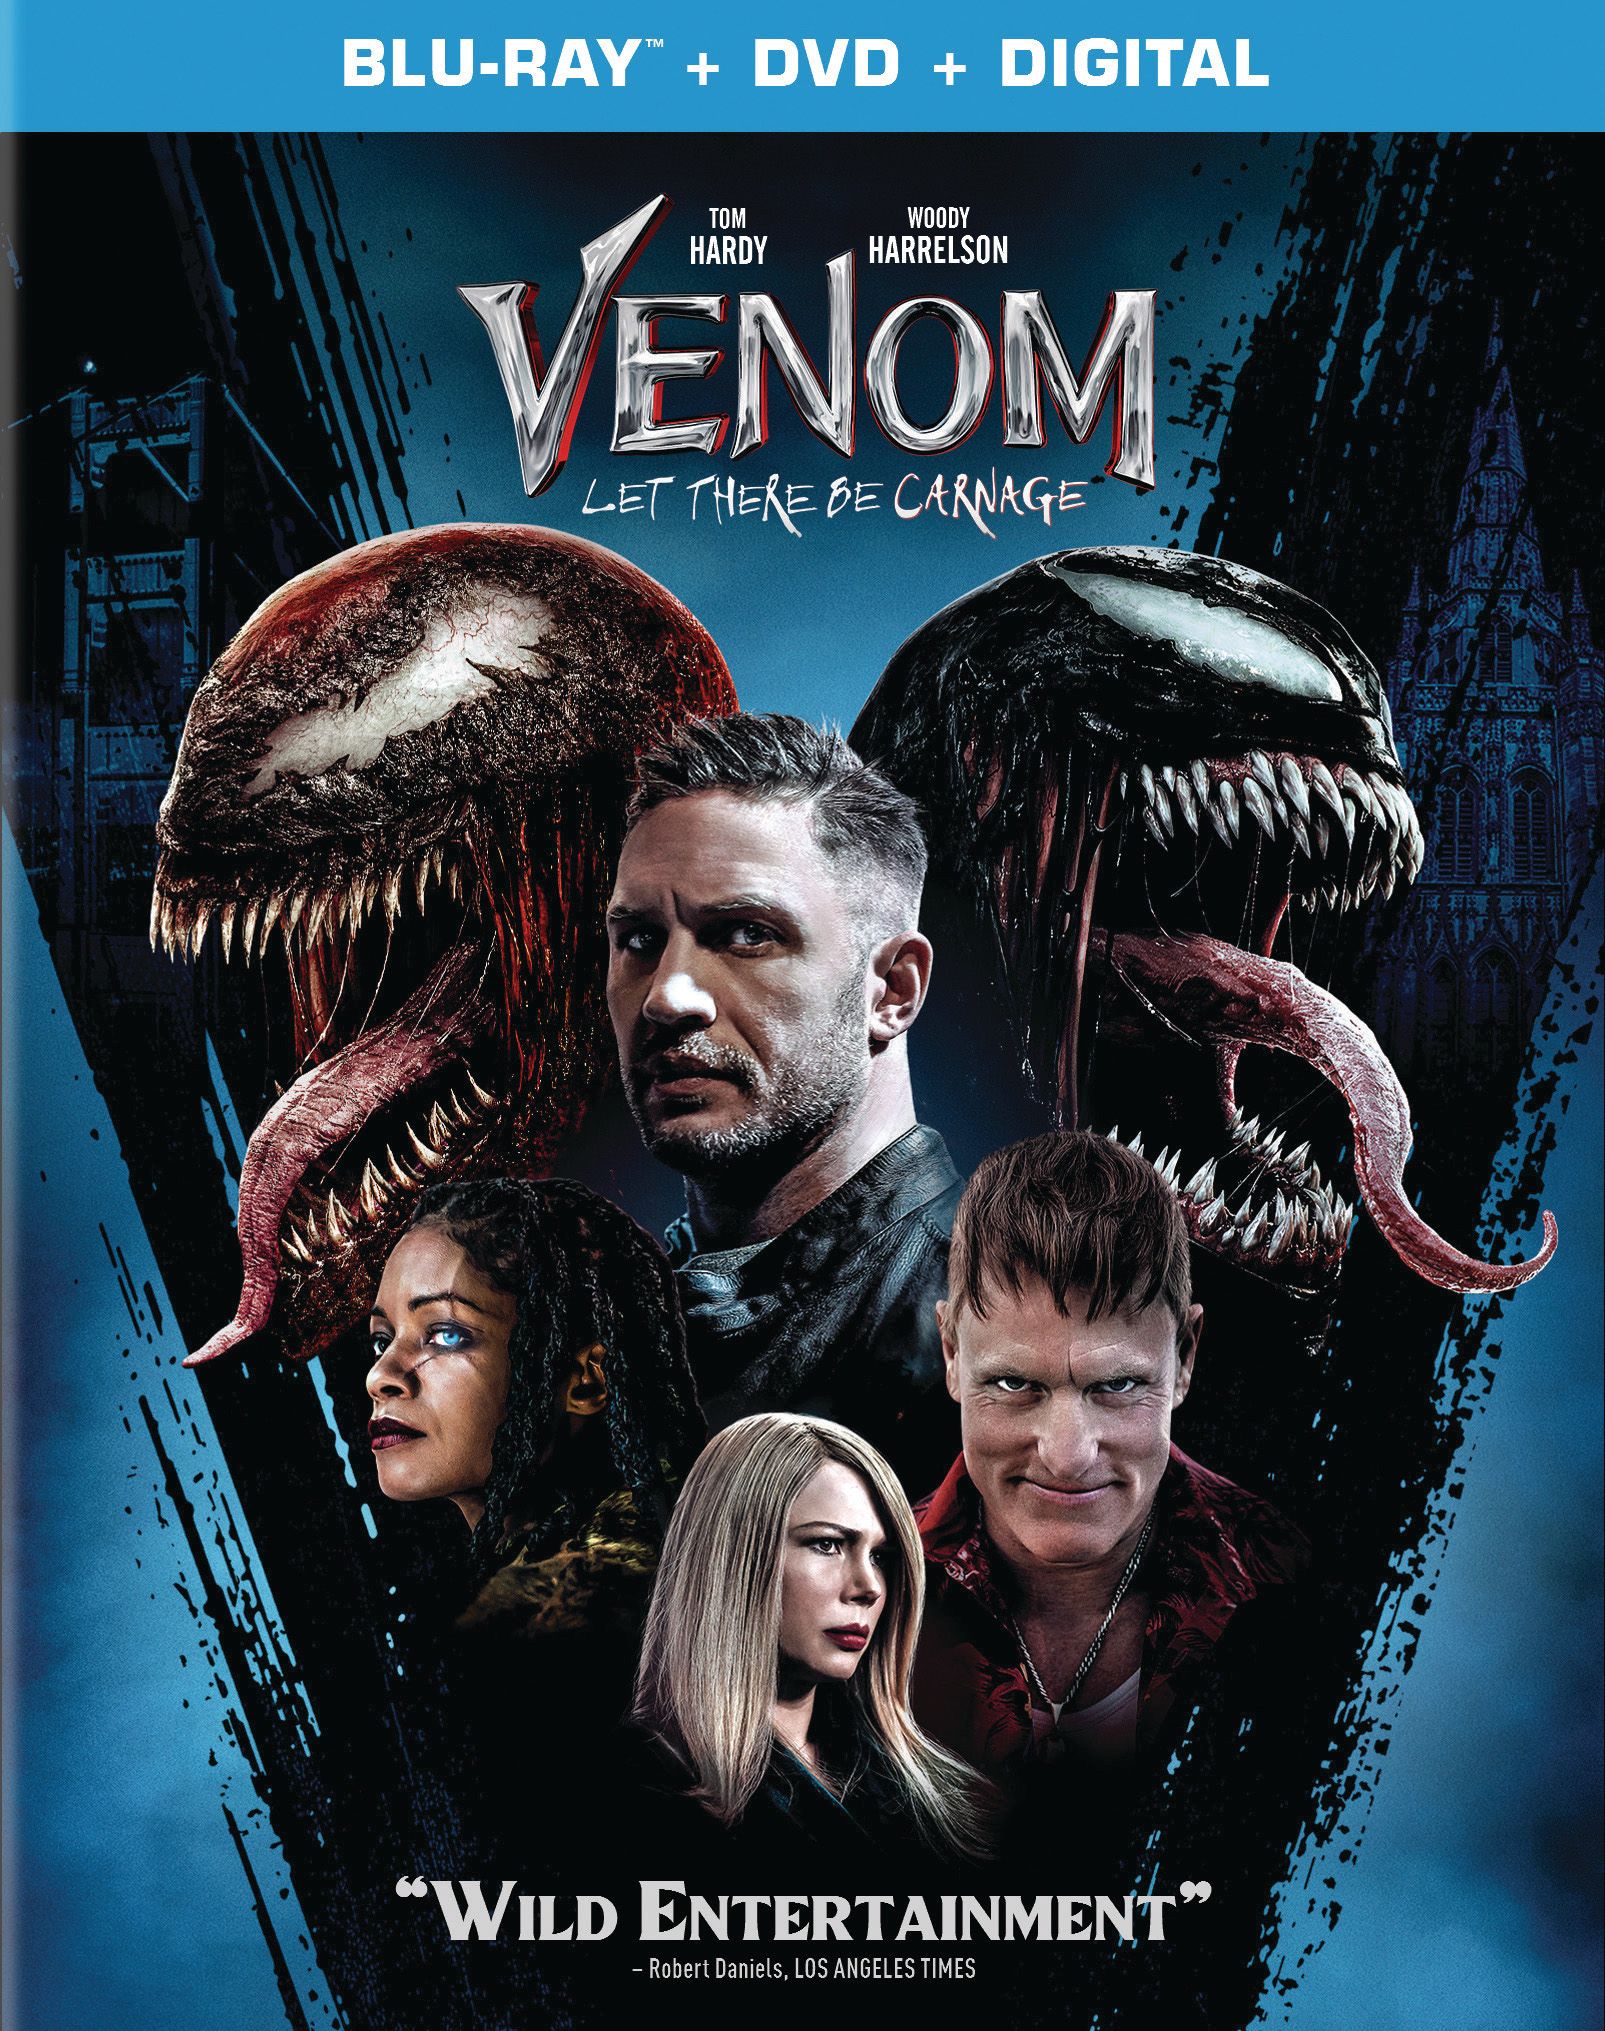 Venom Let There Be Carnage Blu-ray